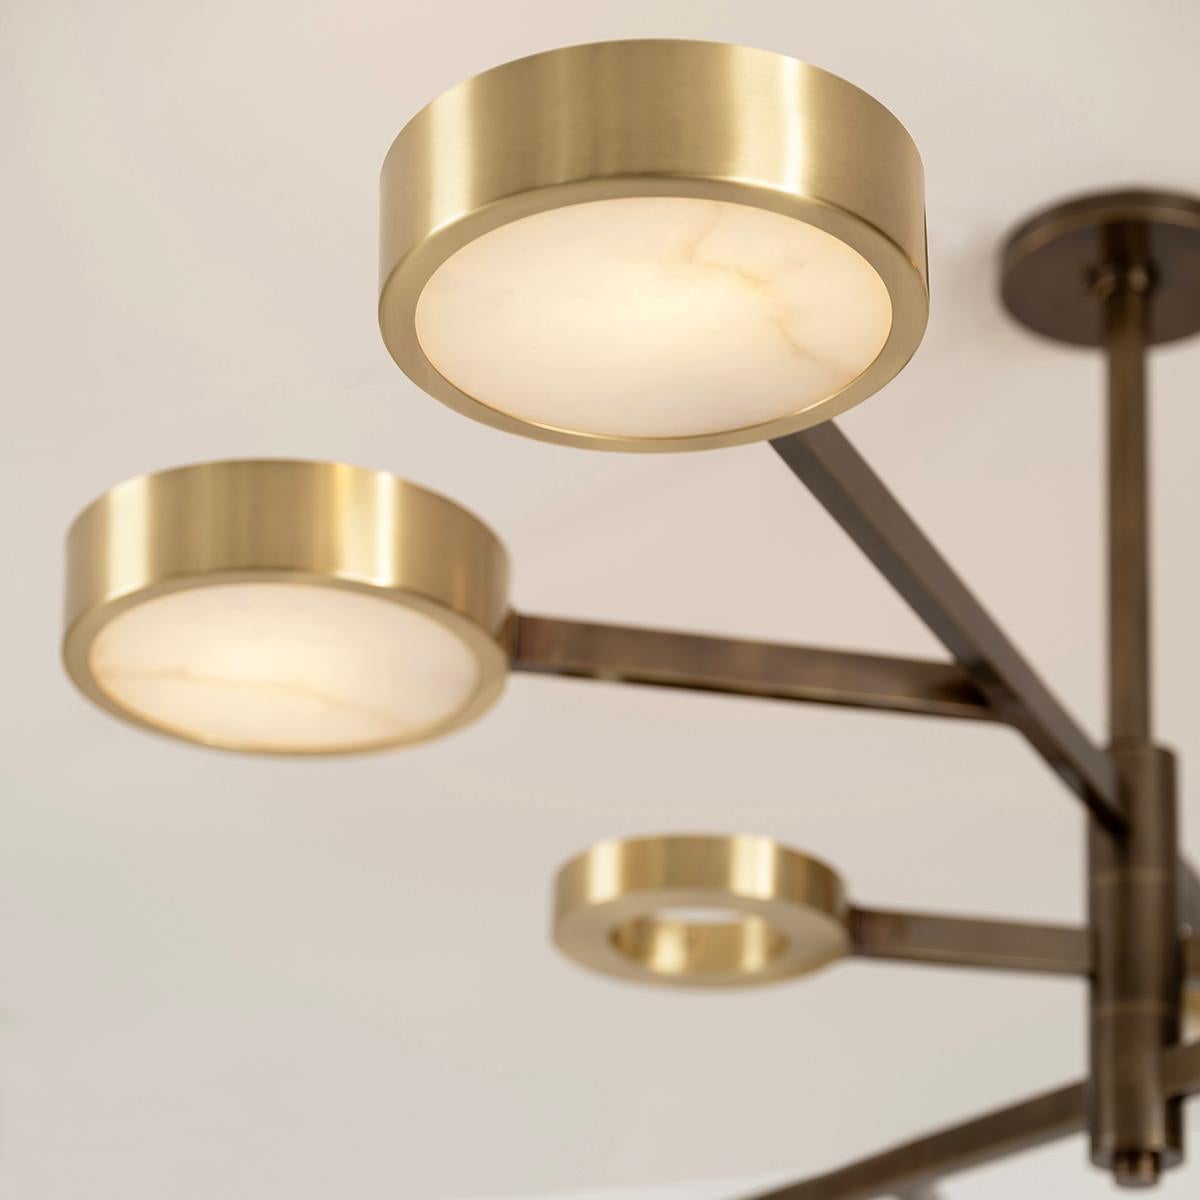 Volterra Ceiling Light by Gaspare Asaro-Satin Nickel and Satin Brass Finish For Sale 2